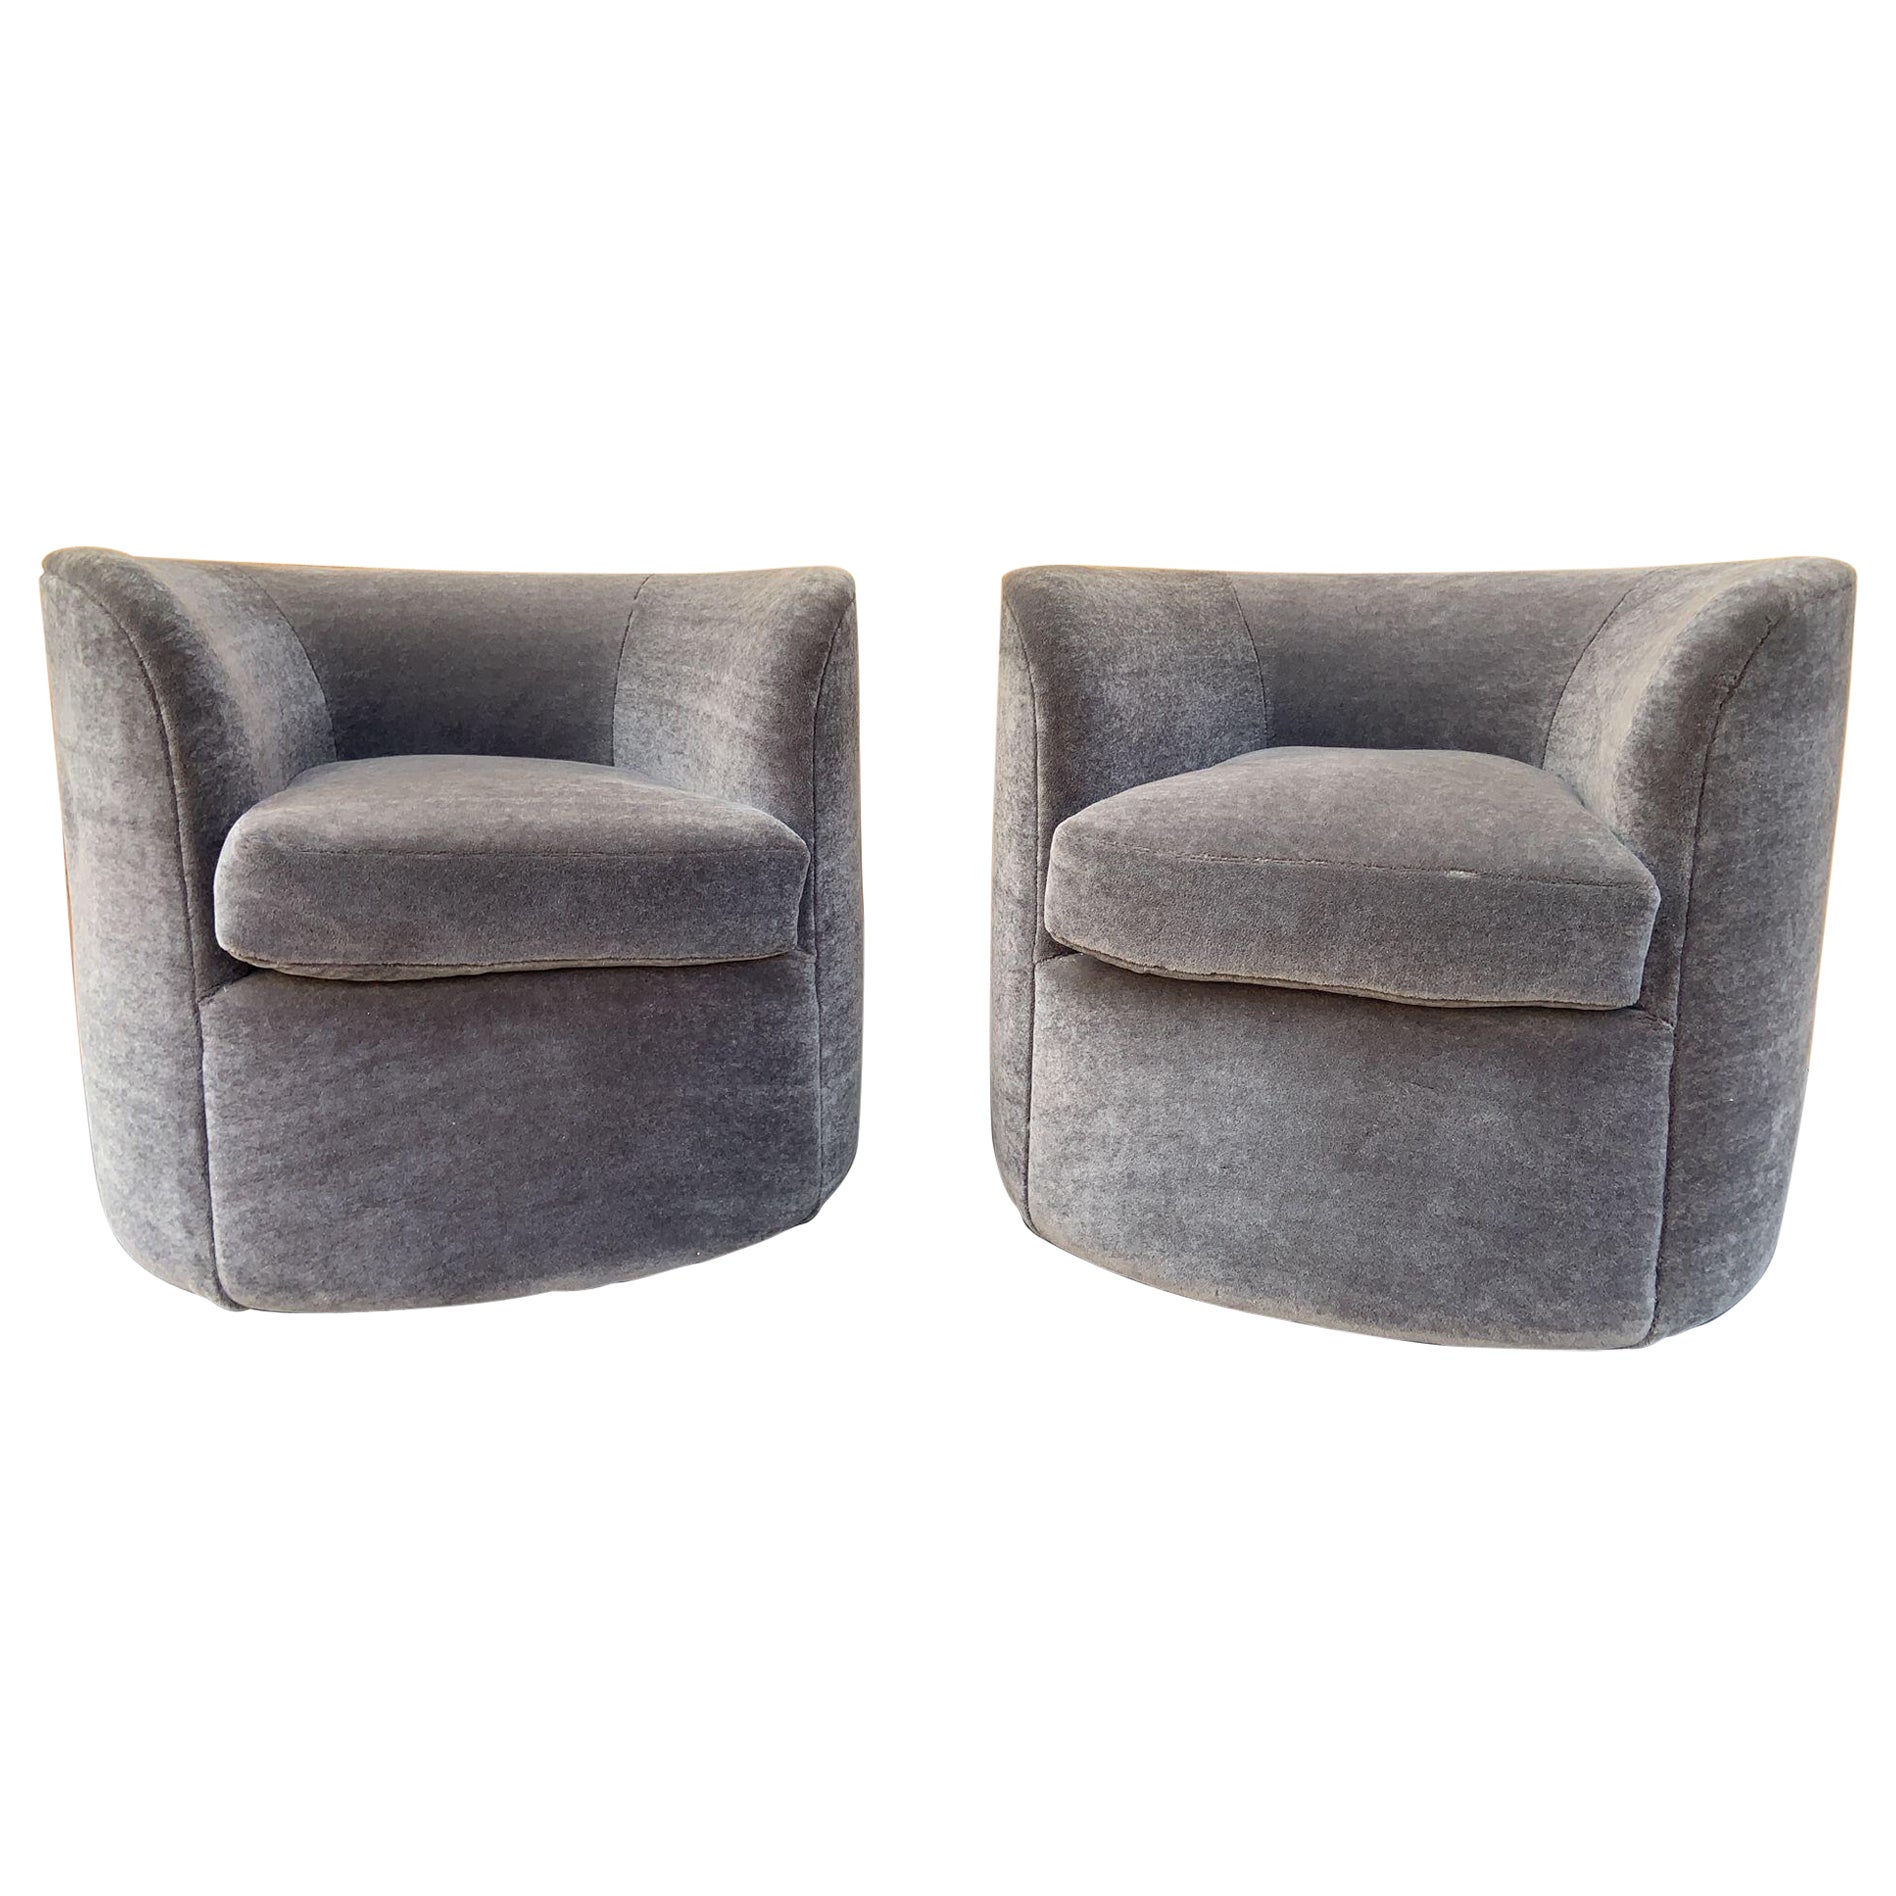 Luxurious Mid Century Faudet-Harrison Swivel Tub Chairs - Newly Upholstered Pair For Sale